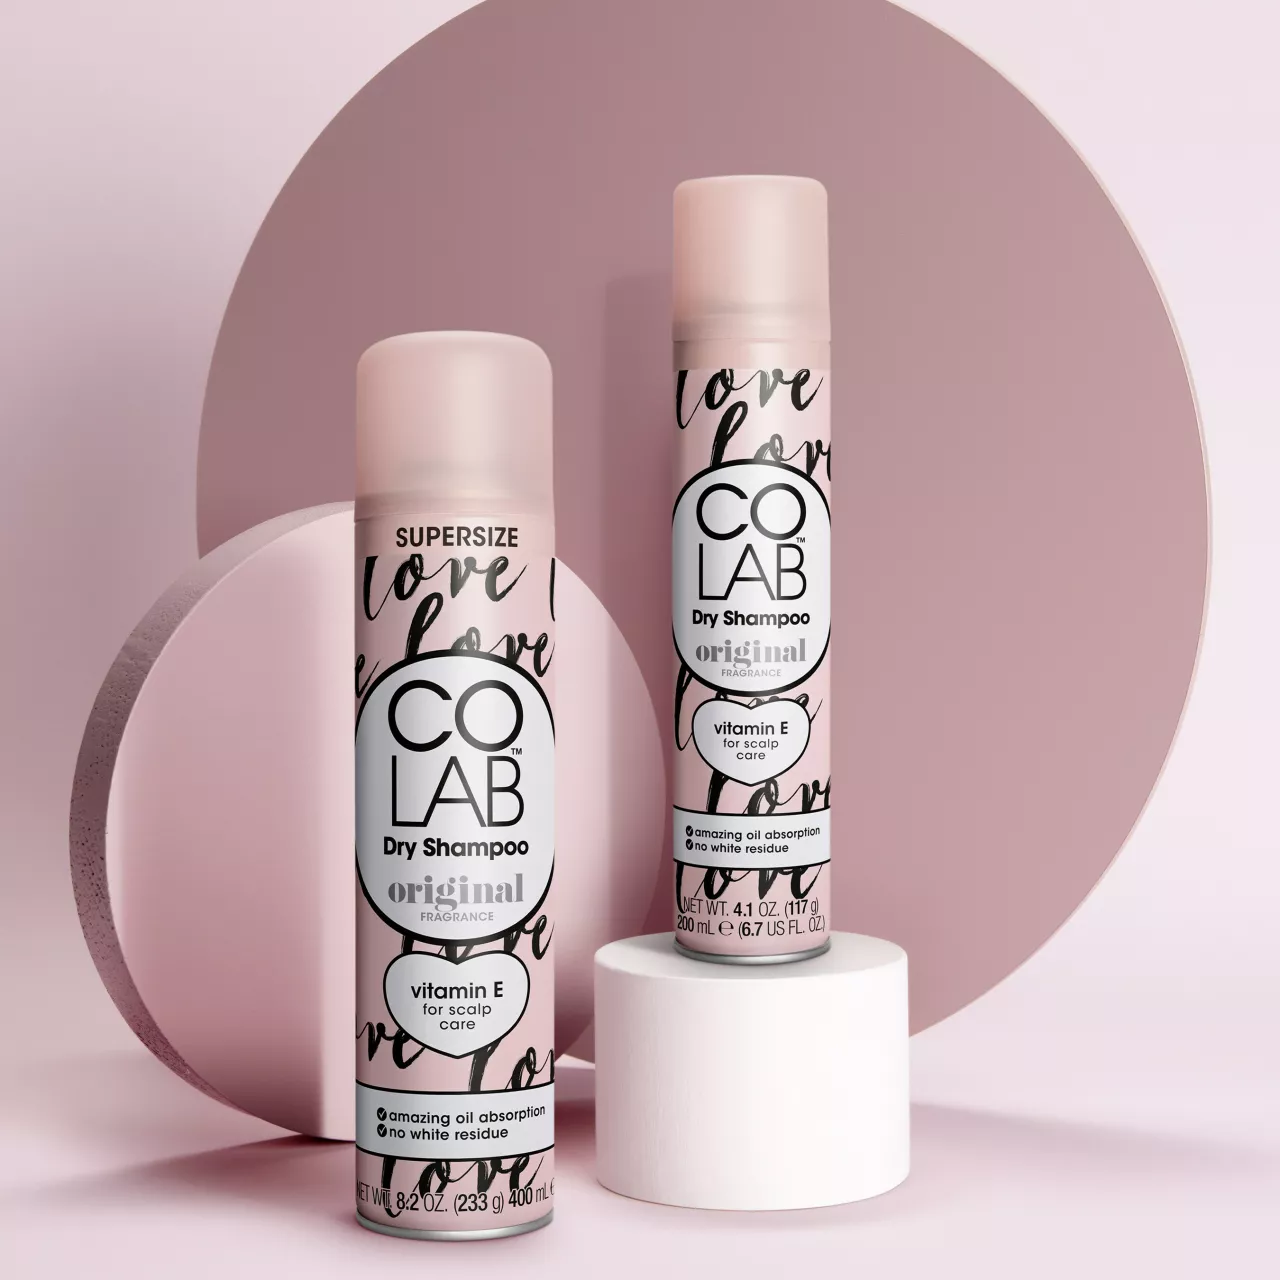 COLAB Dry Shampoo was born only a few years ago, and 25 MILLION cans later, they're now launching their BIGGEST ever TikTok competition #beCOLABconfident img#1